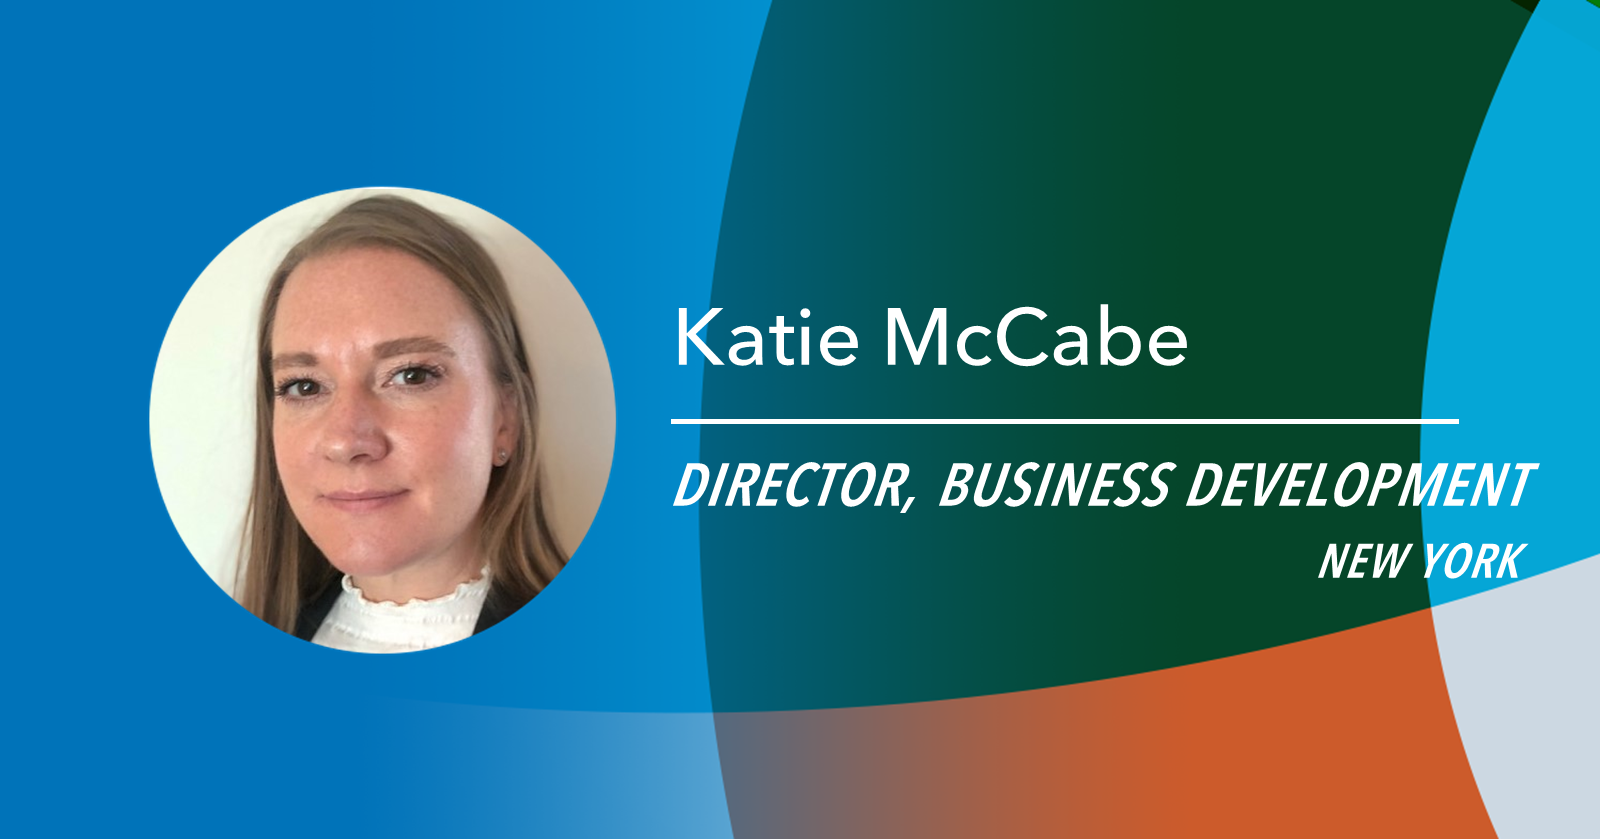 Katie McCabe Joins Growing Empyrean Sales Team as Strategic Director, Business Development for New York